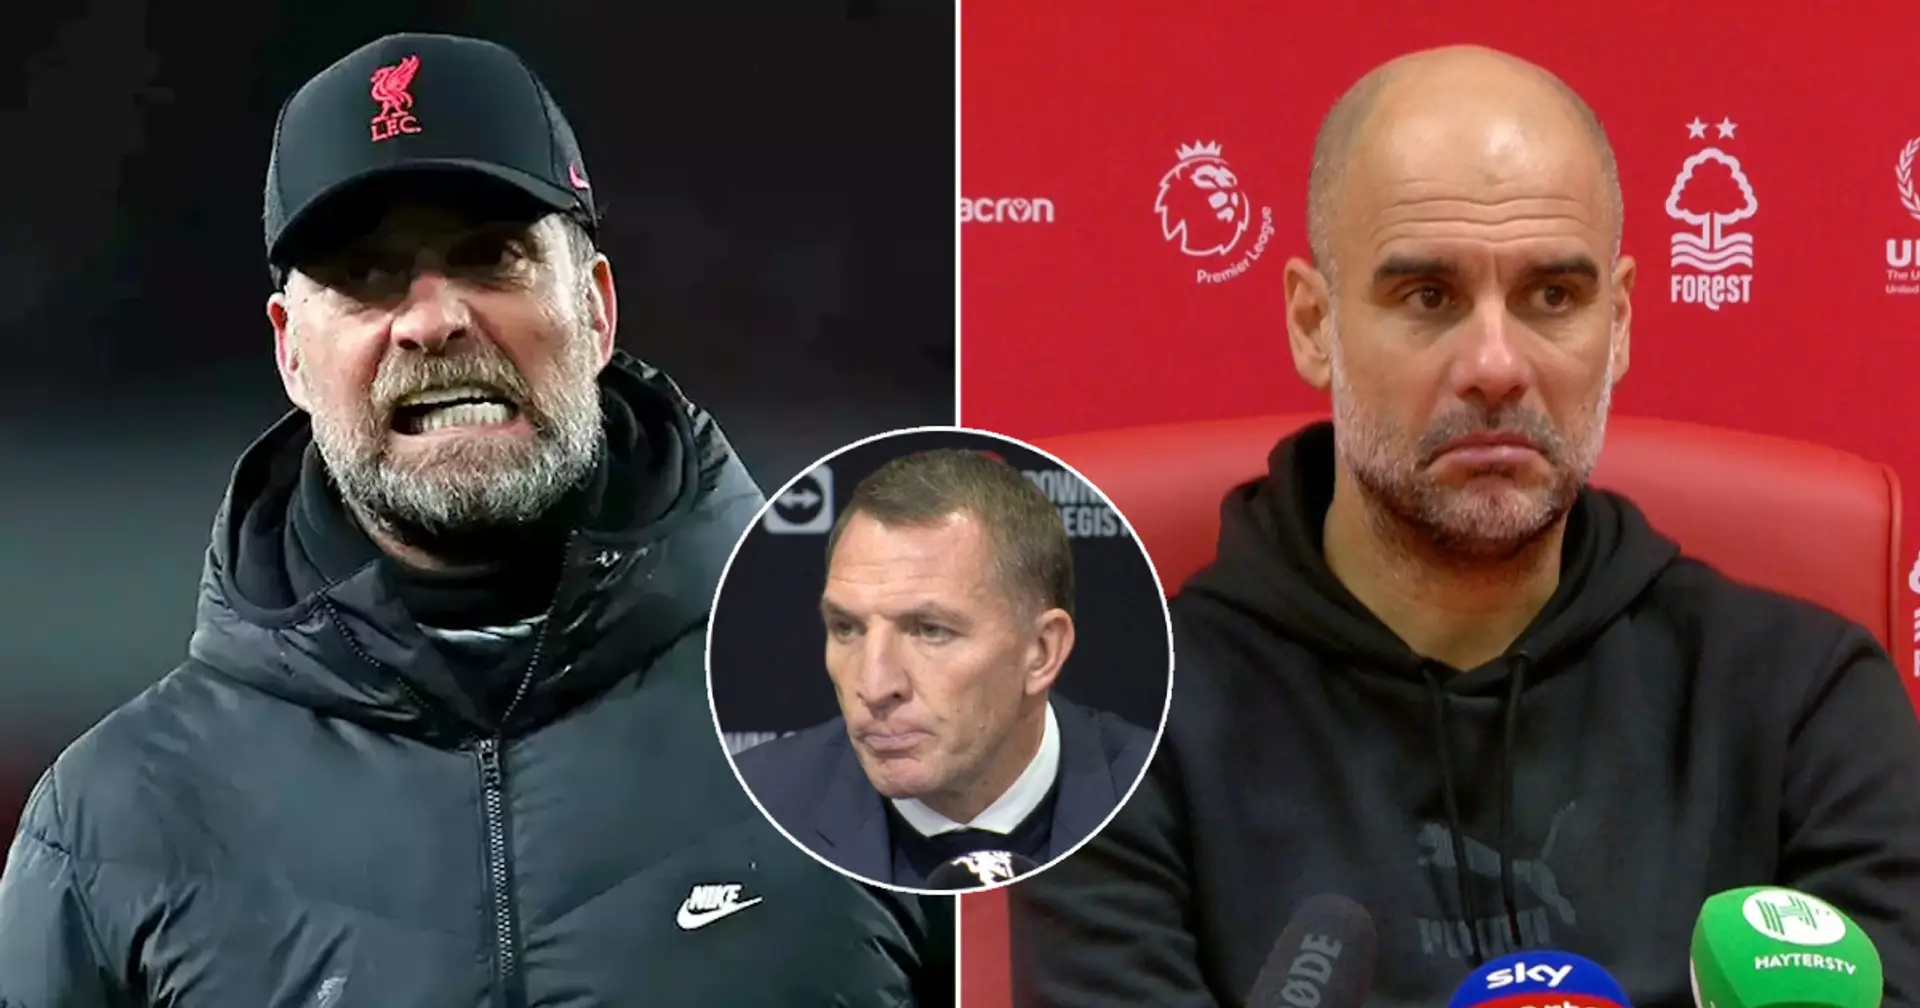 Jurgen Klopp becomes third longest-serving manager in English football - Guardiola right behind him